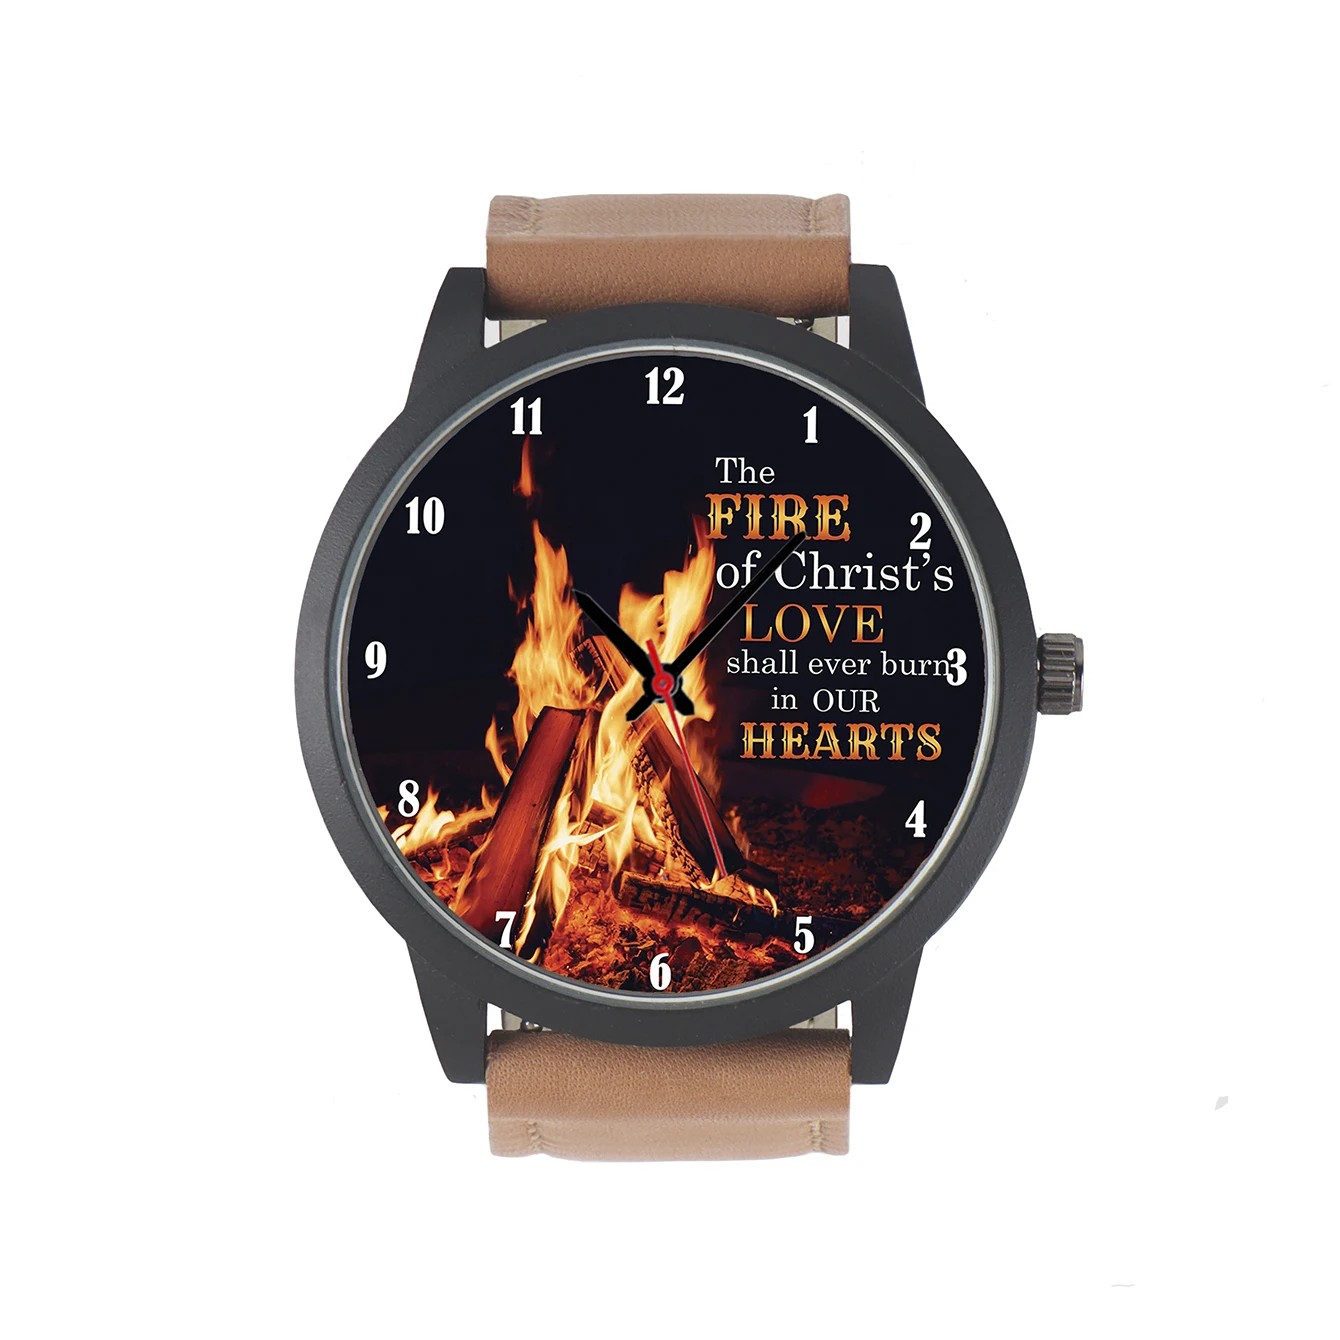 Free Shipping Factory Store Fire Design Christ's Love Gifts For followers of Christianity Men's Battery Quartz Wrist Watch l5b83g for fire stick lite fire stick4k fire cube remote control drop shipping